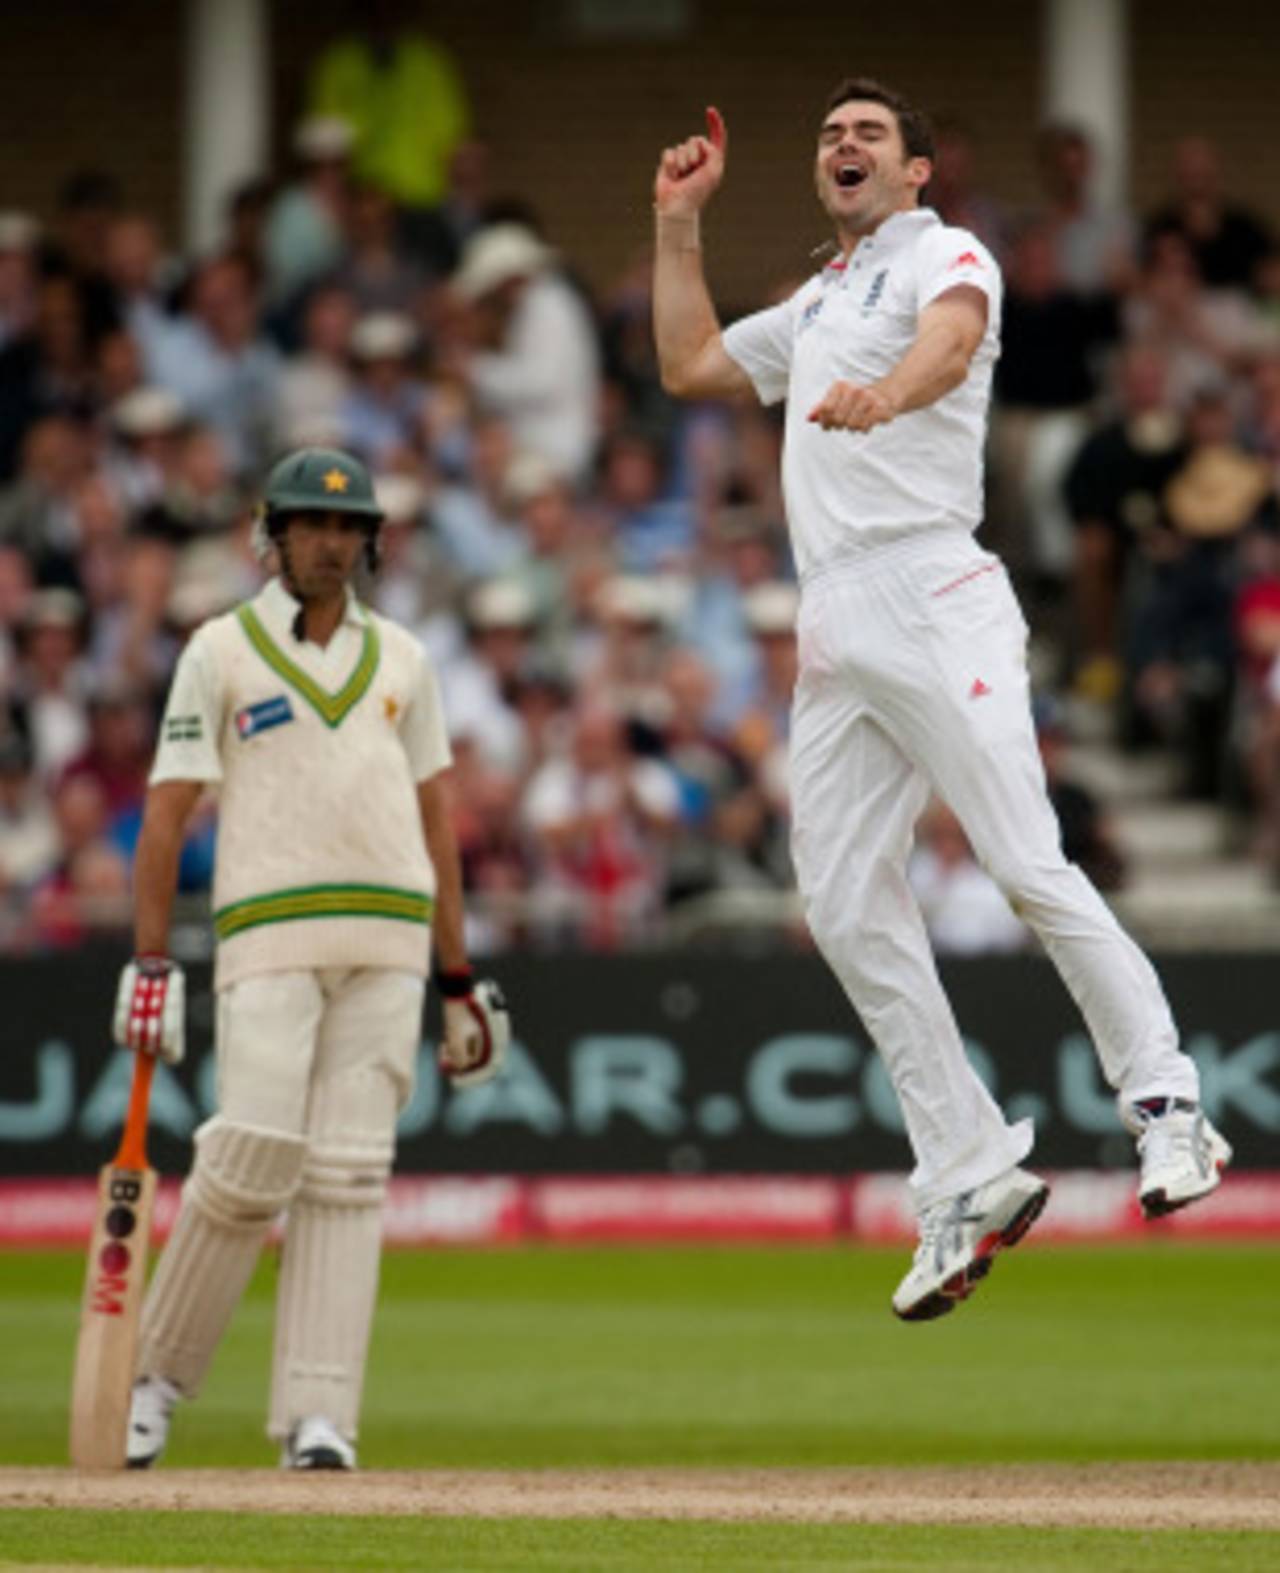 James Anderson caused problems throughout the day for Pakistan's batsmen, England v Pakistan, 1st Test, Trent Bridge, 2nd day, July 30, 2010